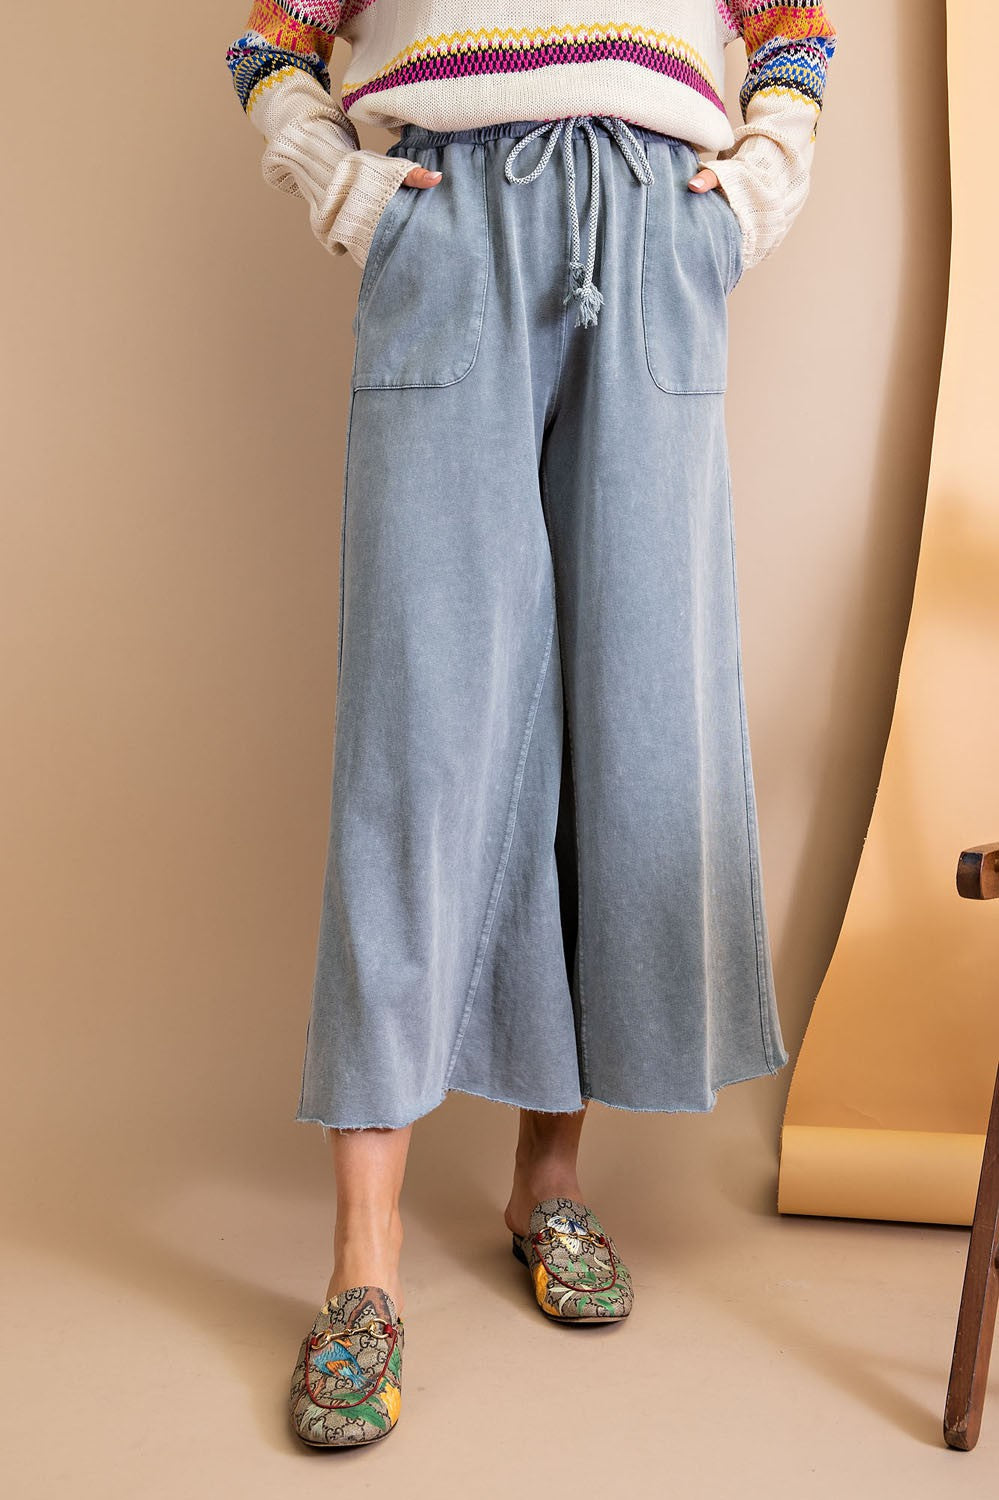 Easel Washed Terry Knit Wide Leg Pants in Faded Teal  Easel   